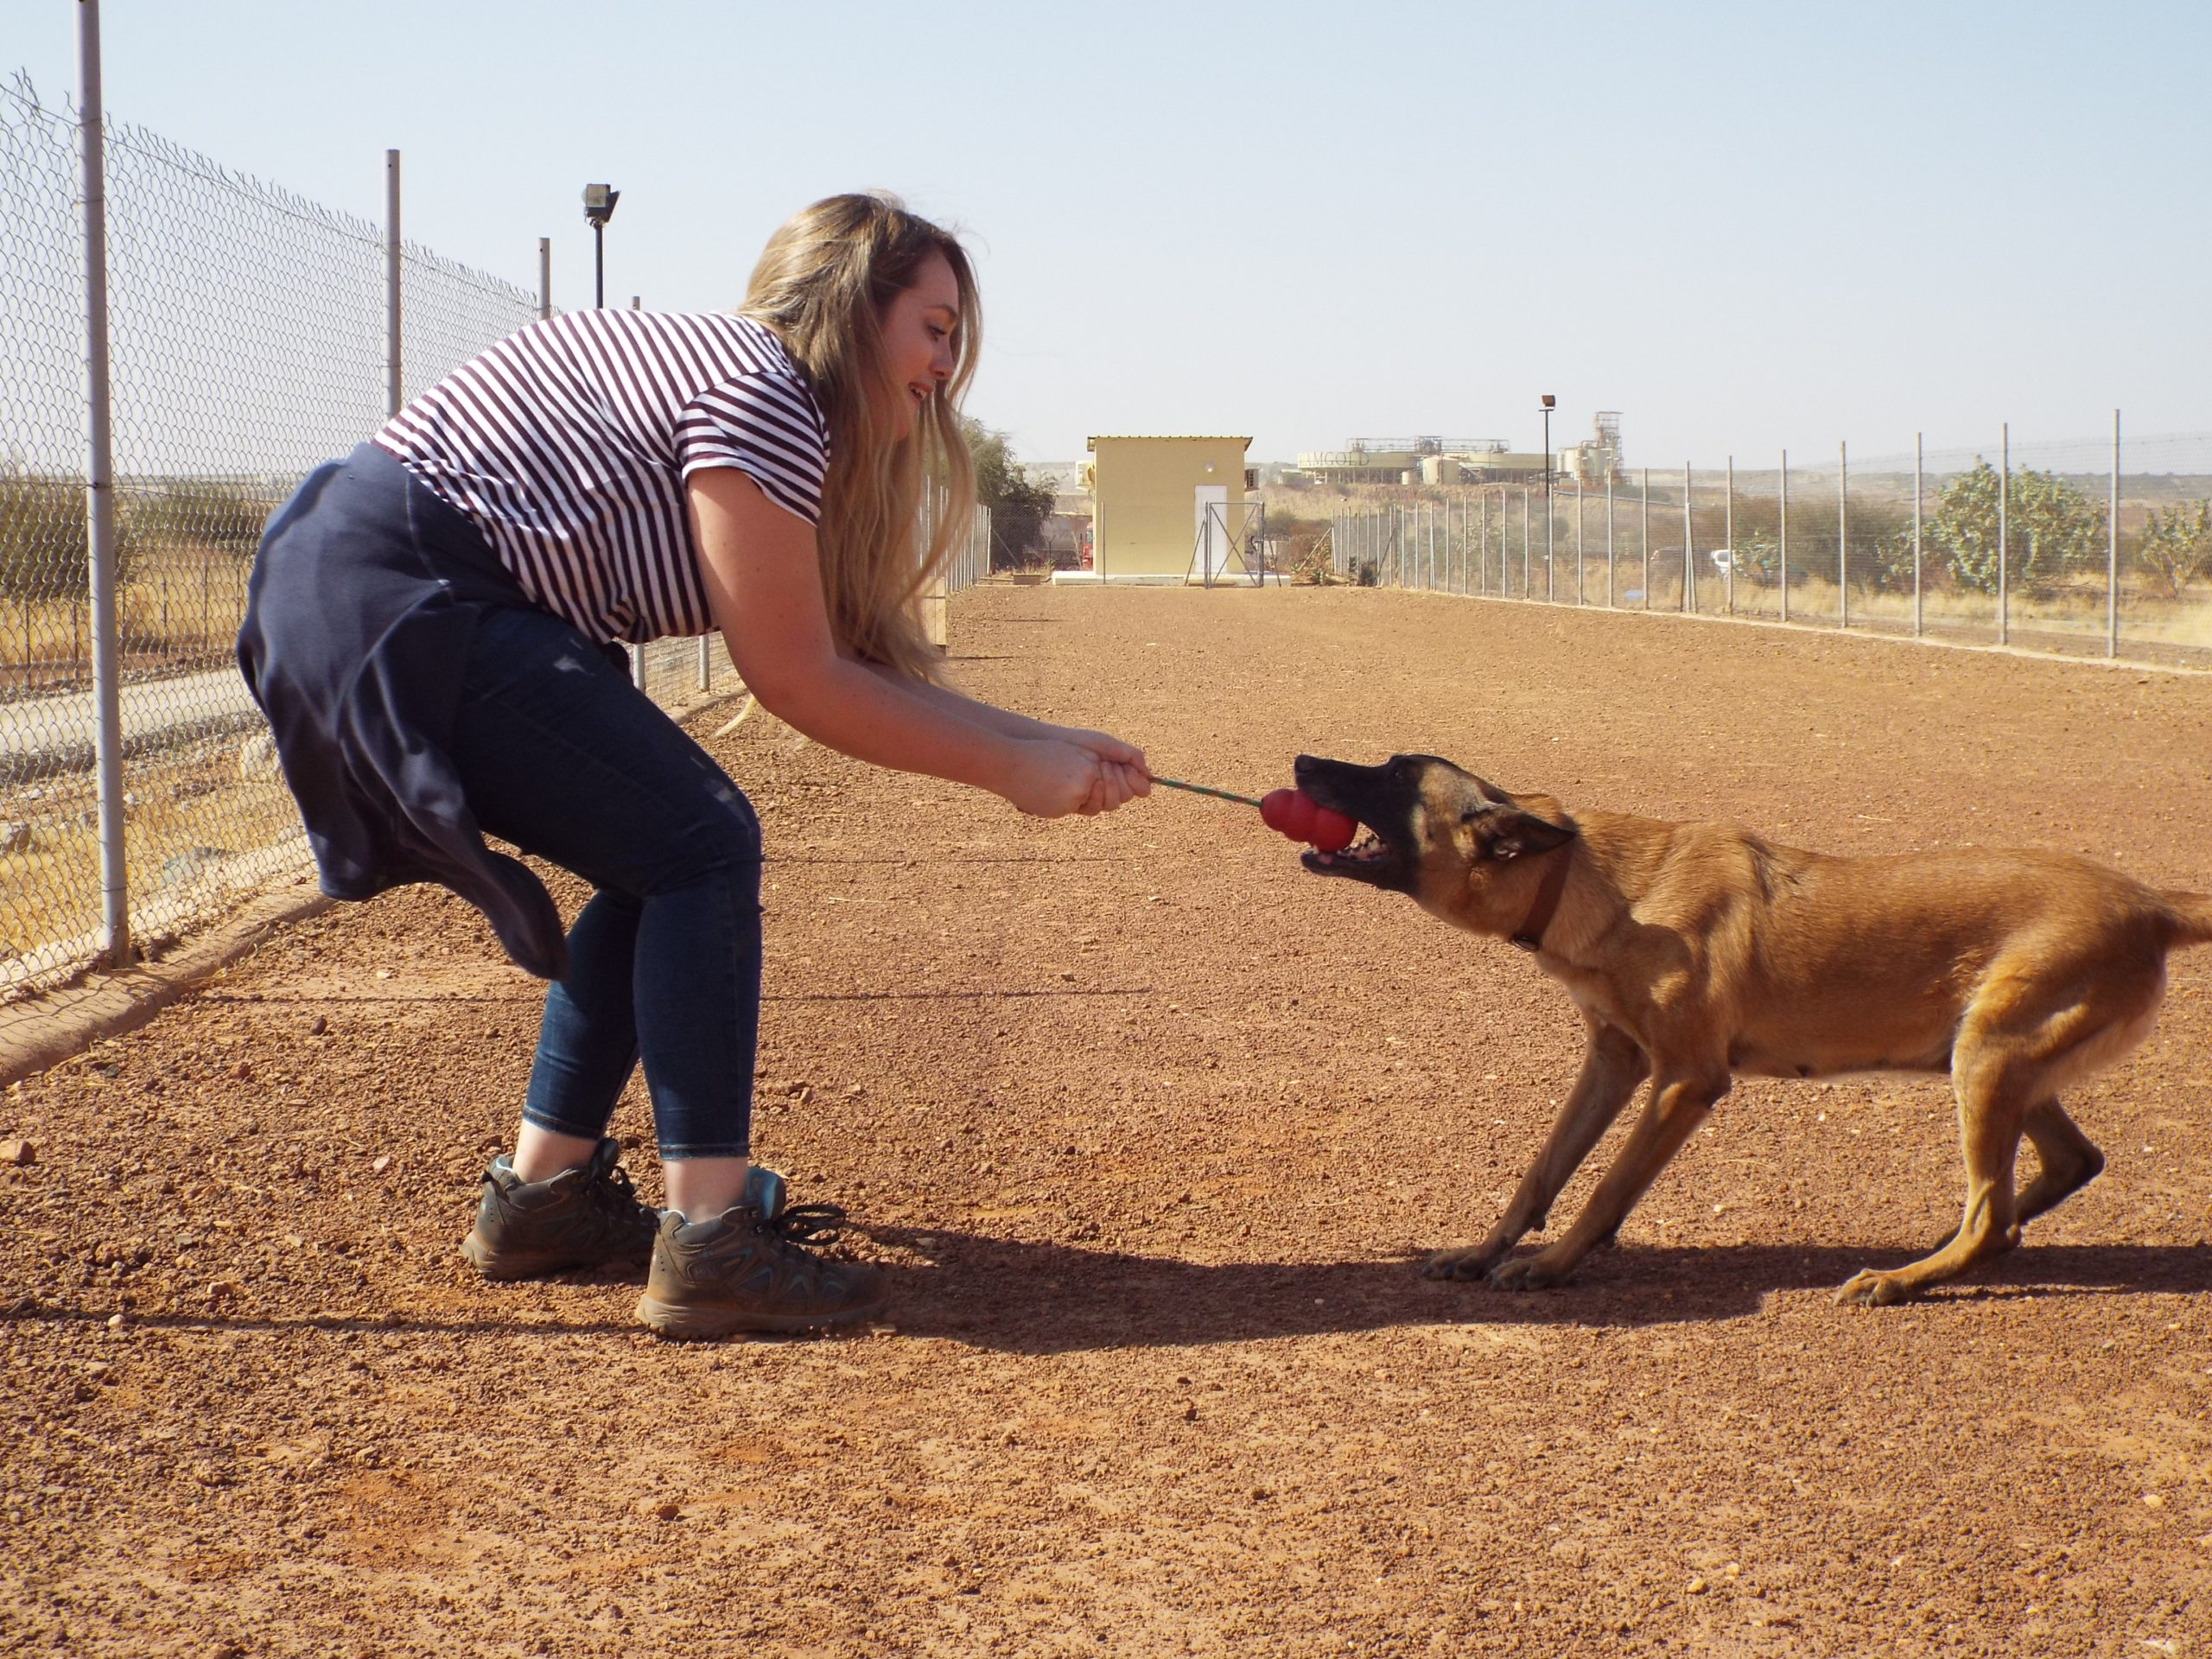 Project Executive Kelly experiencing bite training with SafeLane canines in Burkina Faso